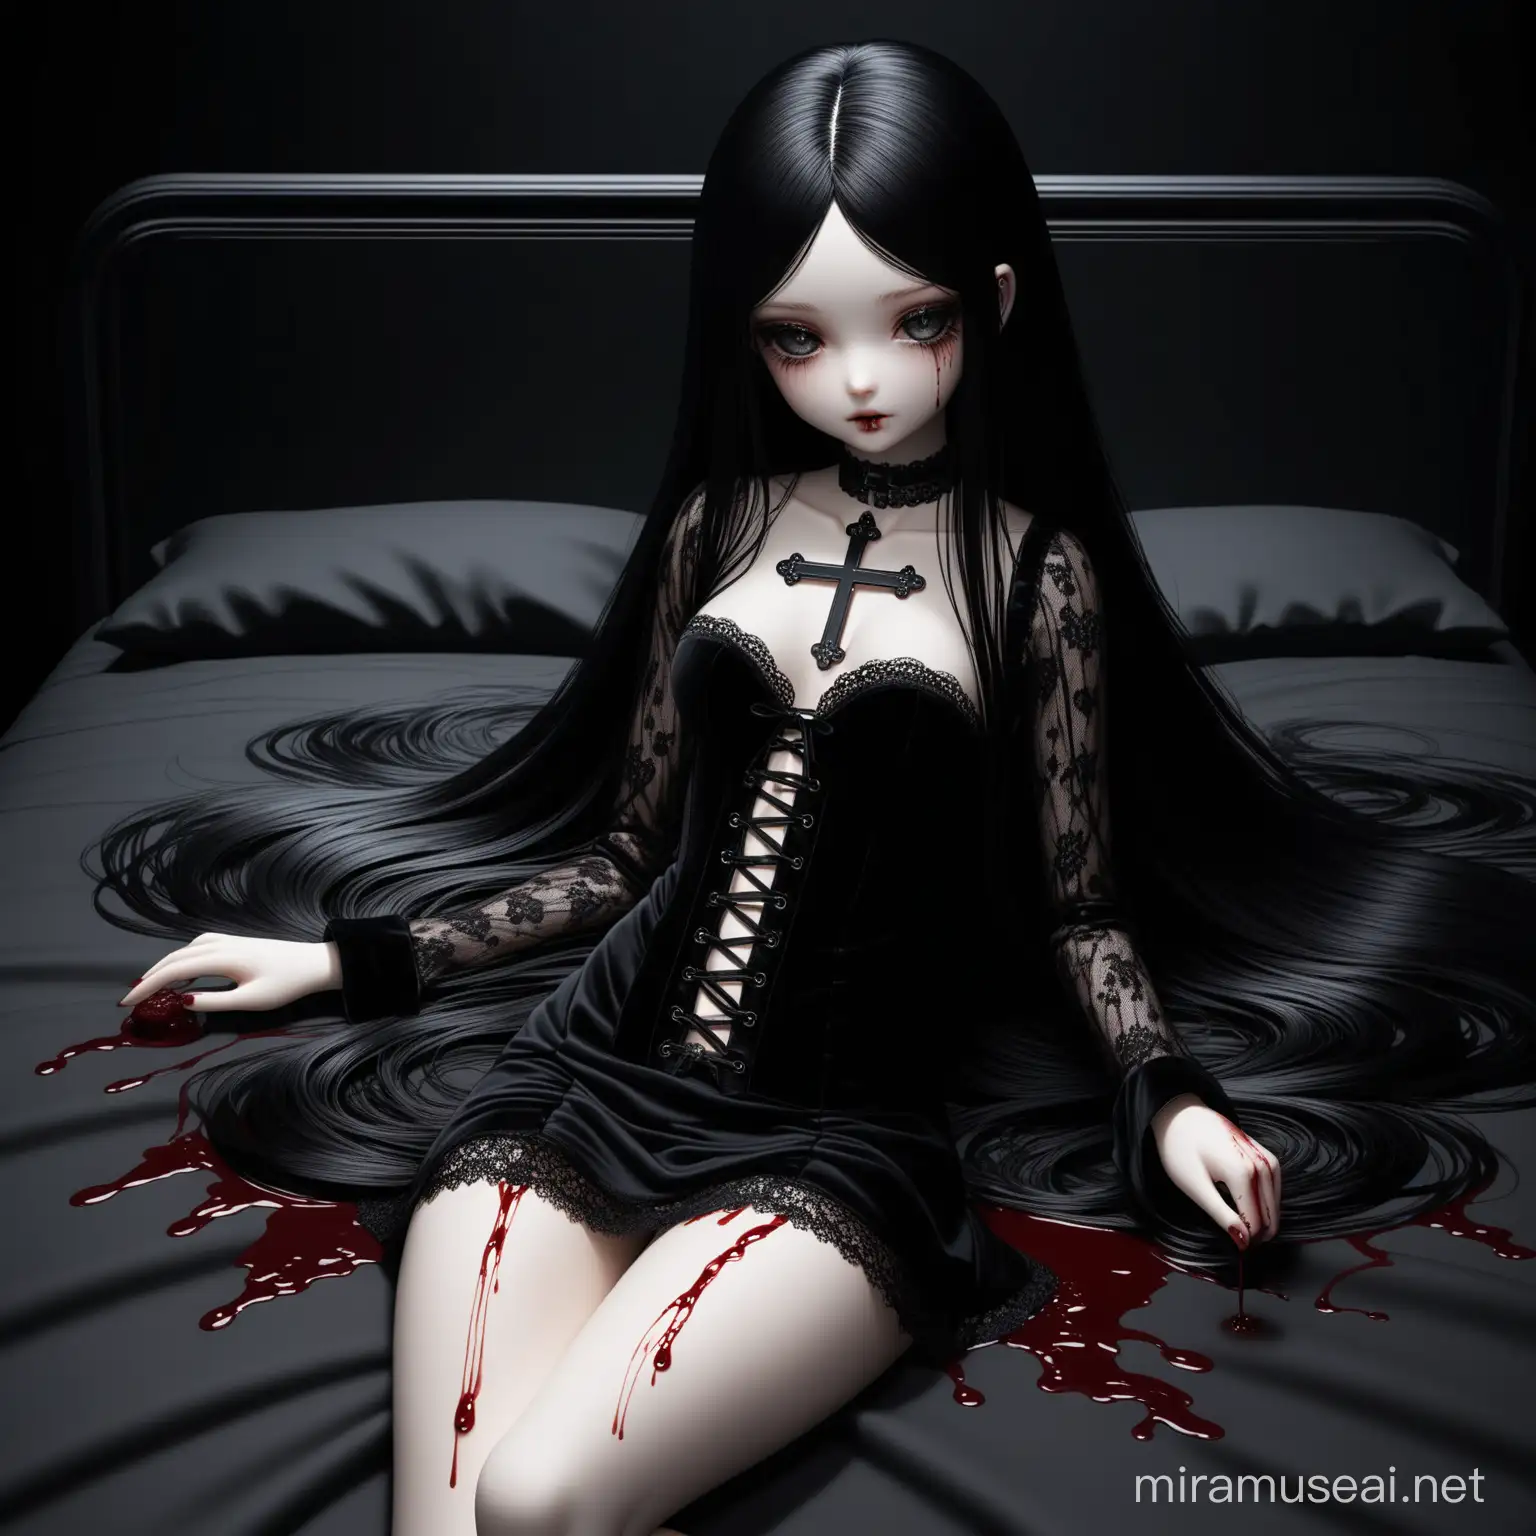 Hyperrealistic Jointed BJD Doll with Foxy Eyes and Long Black Hair on Black Bed